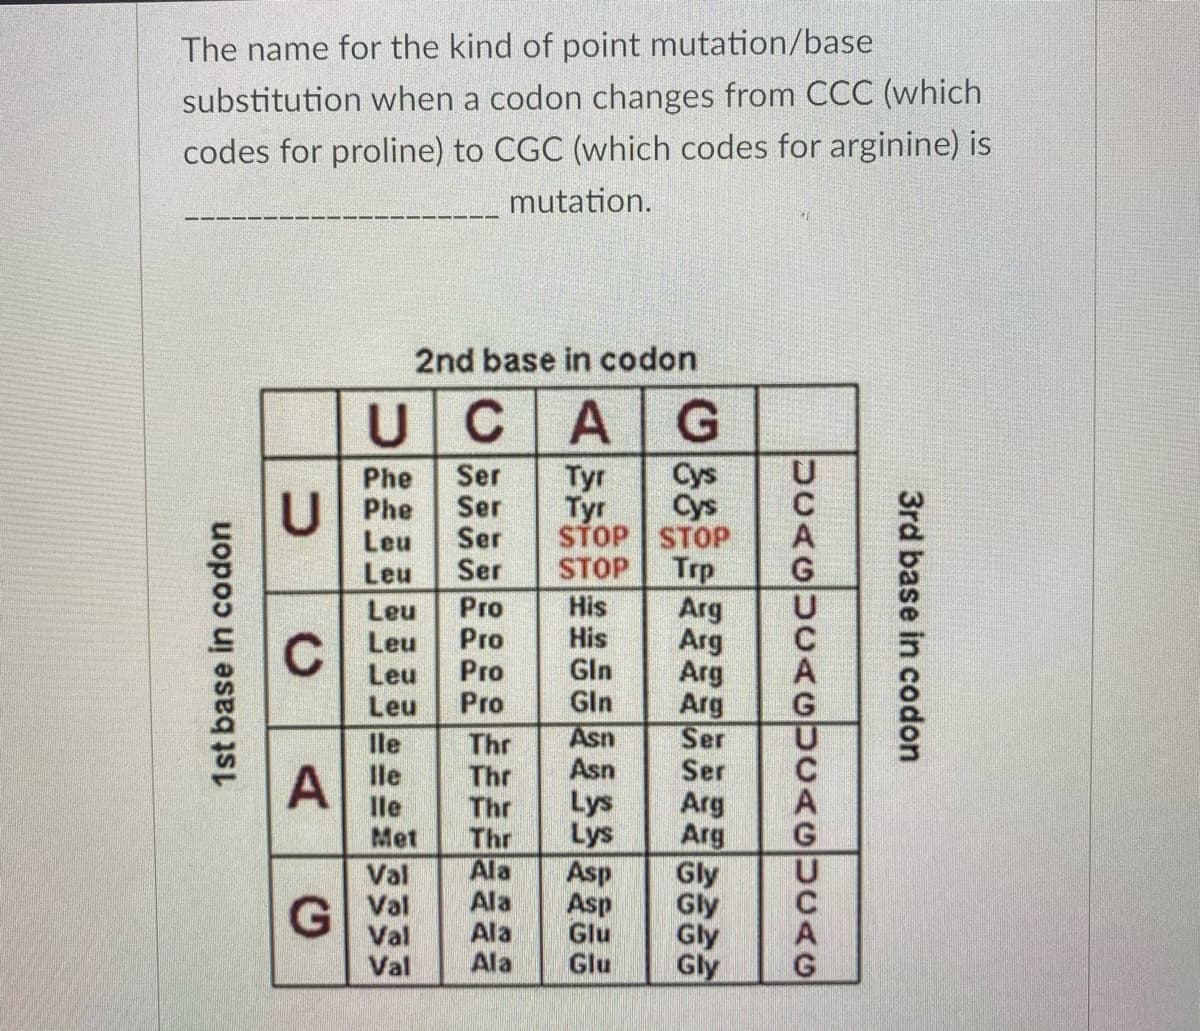 The name for the kind of point mutation/base
substitution when a codon changes from CCC (which
codes for proline) to CGC (which codes for arginine) is
mutation.
2nd base in codon
U
CAG
Cys
Cys
STOP STOP
Trp
Arg
Arg
Arg
Arg
Ser
Ser
Arg
Arg
Gly
Gly
Gly
Gly
Phe
U Phe
Leu
Leu
Ser
Ser
Ser
Ser
Tyr
Tyr
STOP
Leu
Leu
Leu
Leu
Pro
Pro
Pro
Pro
His
His
Gln
Gln
C
Asn
Asn
lle
lle
lle
Met
Thr
Thr
Thr
Thr
Ala
Ala
Ala
Ala
Lys
Lys
Asp
Asp
Glu
Glu
Val
Val
Val
Val
3rd base in codon
DCAGUCAGUCAGUCAG
1st base in codon
